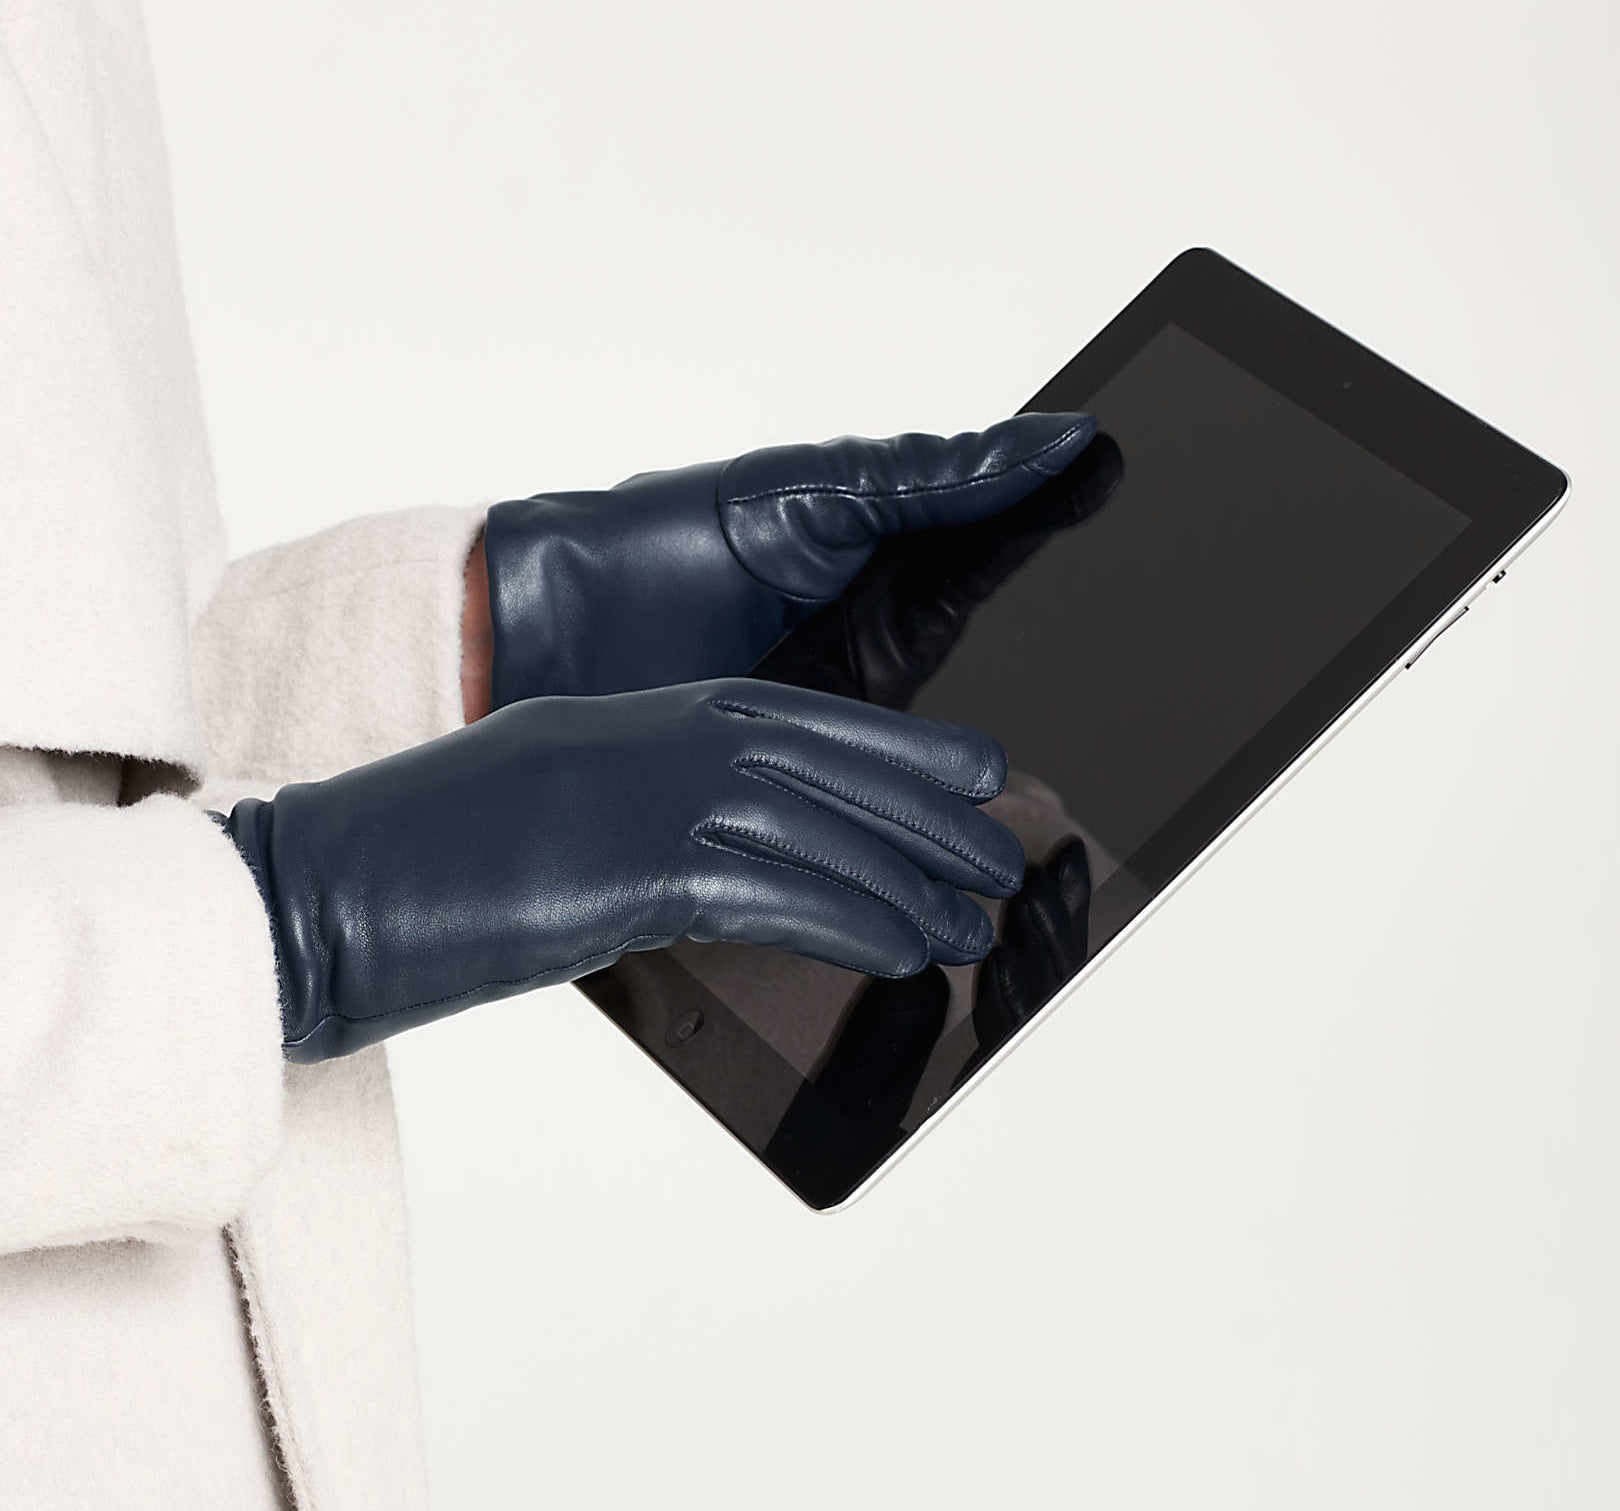 a model wearing the navy leather gloves while holding an iPad.